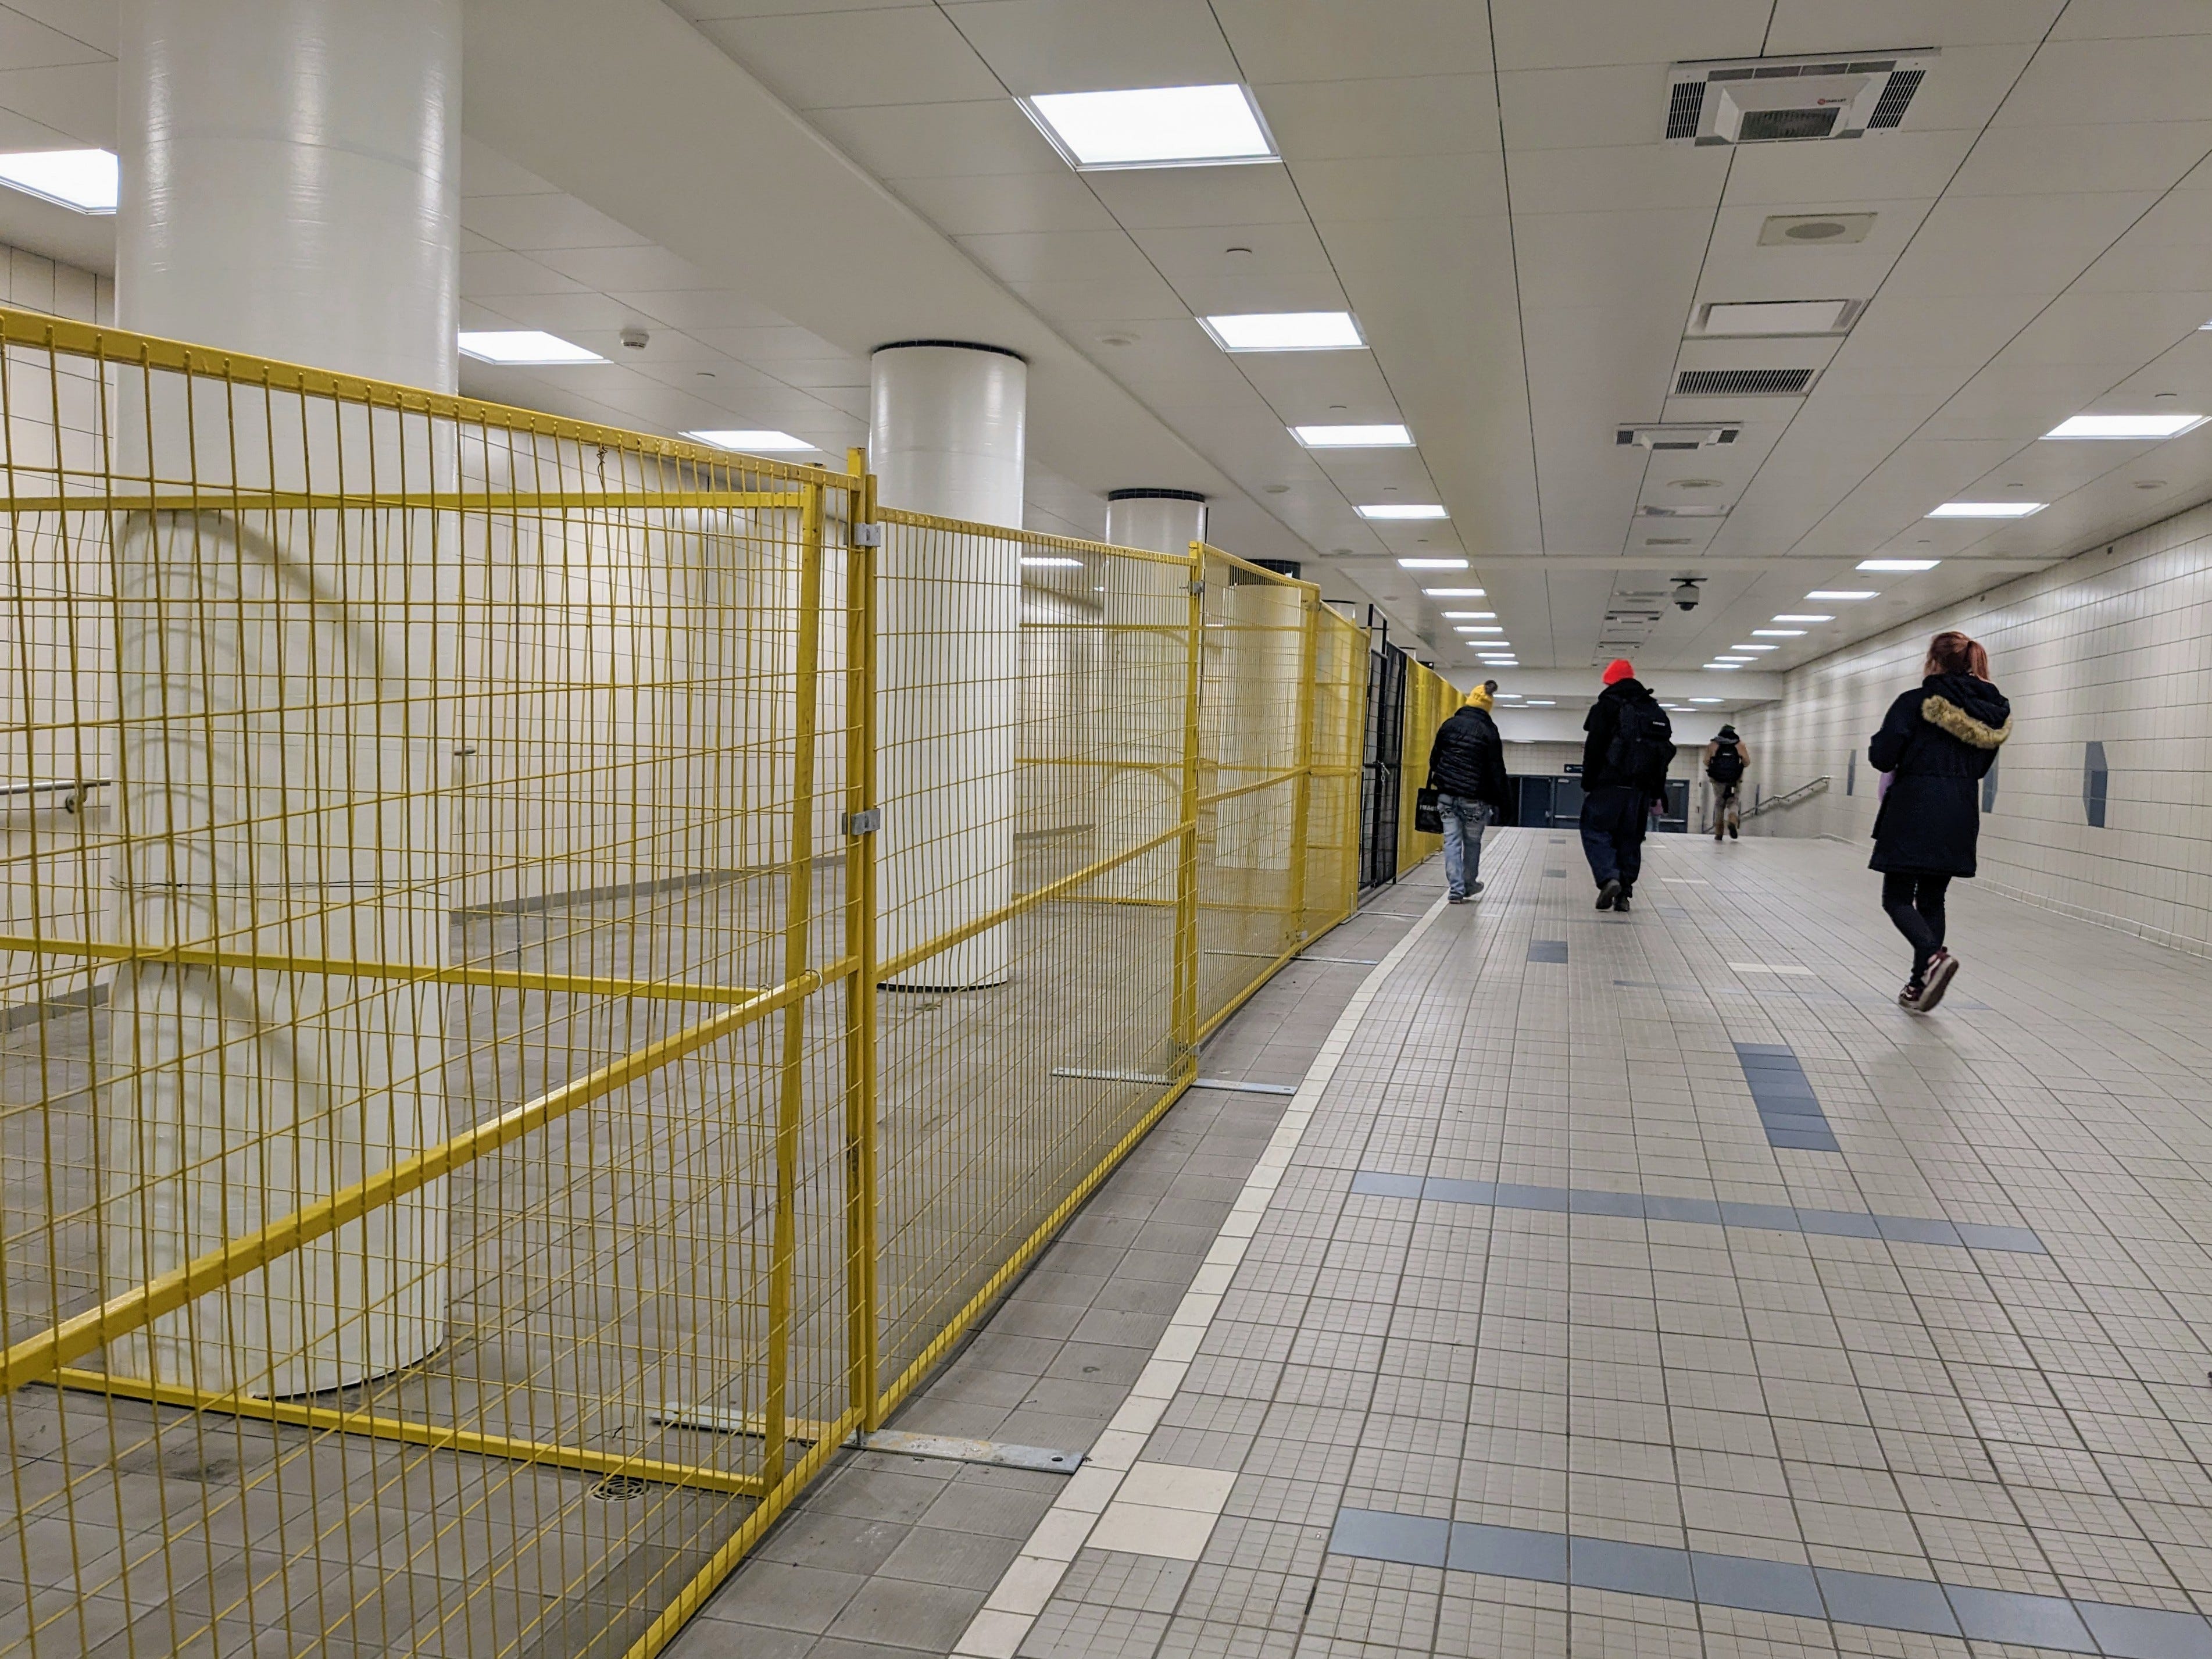 A transit tunnel in Edmonton is underground, showing people walking through alongside a yellow steel fence that closes off an open area in the tunnel, where on house people used to congregate and keep warm. Fluorescent lights beam overhead. The photo has a sense of coldness and Cavernous space